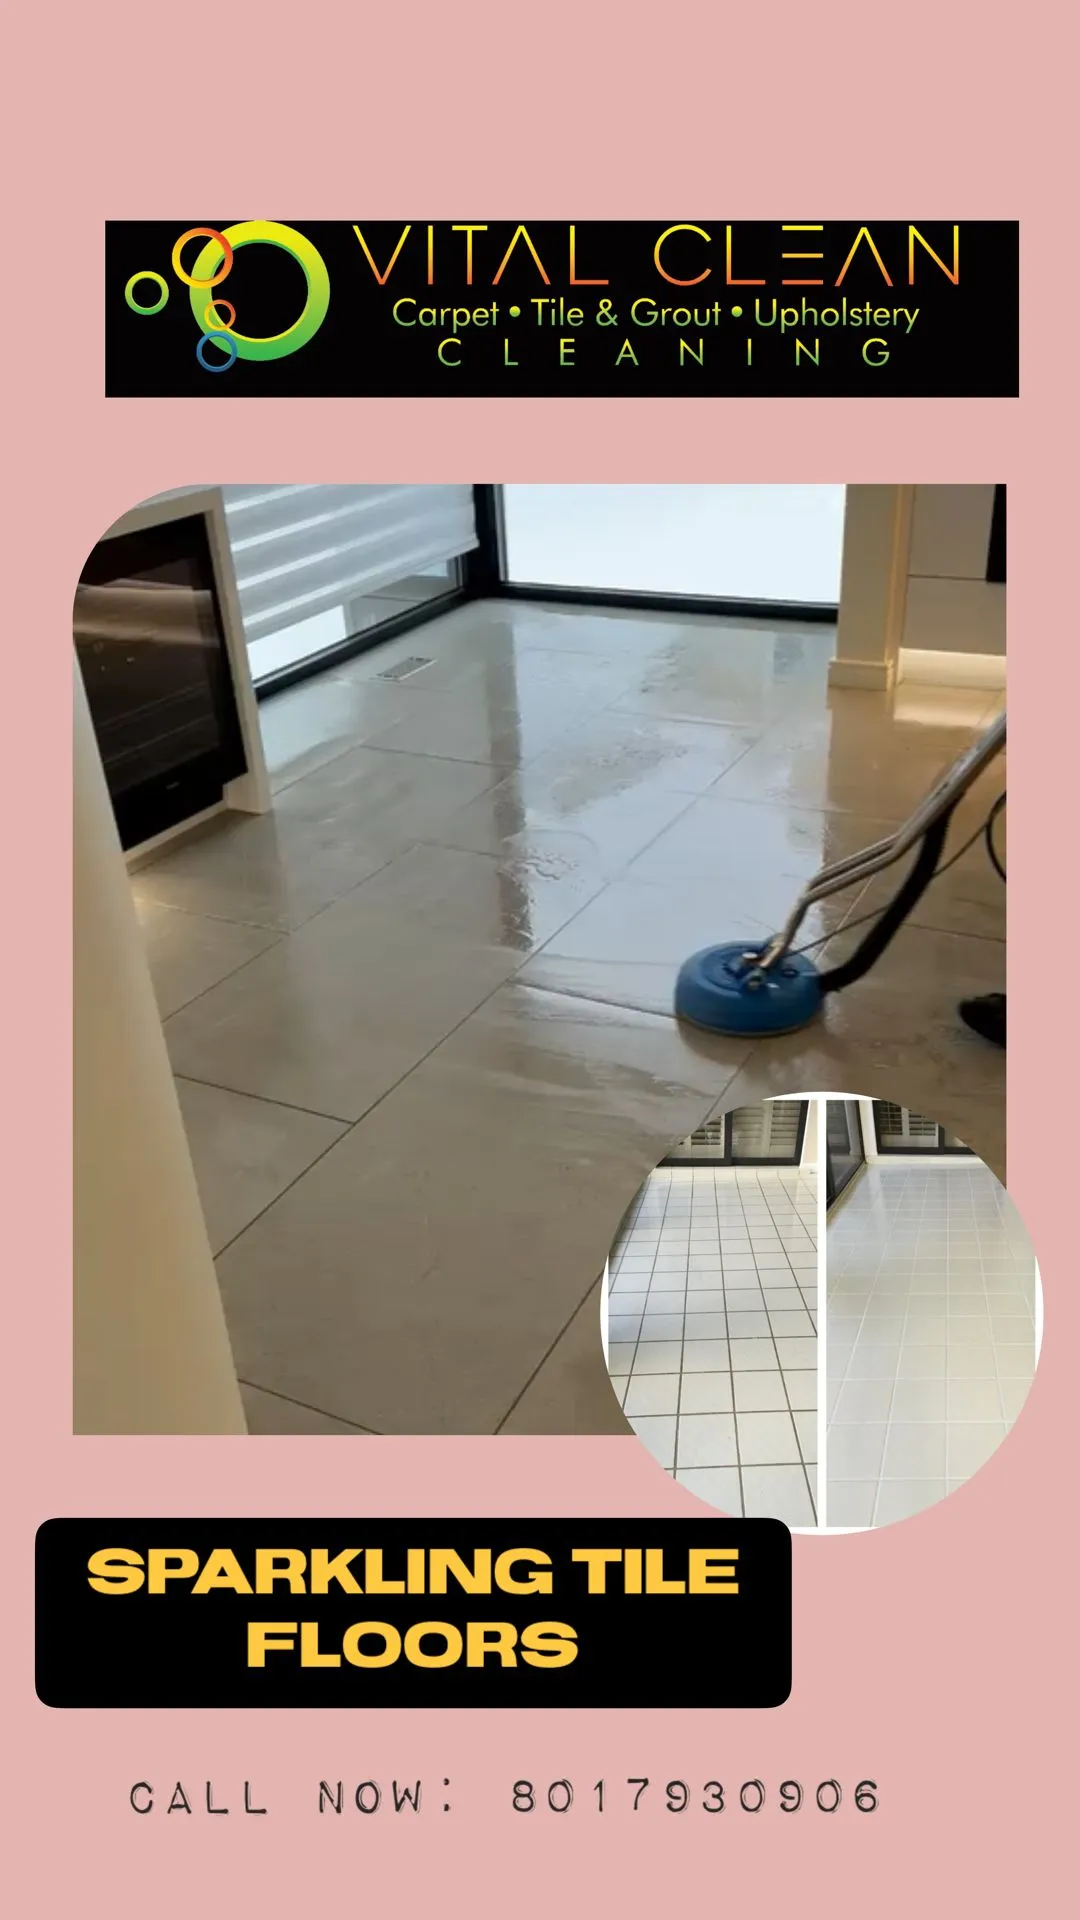 Tile and grout cleaning in Salt Lake City